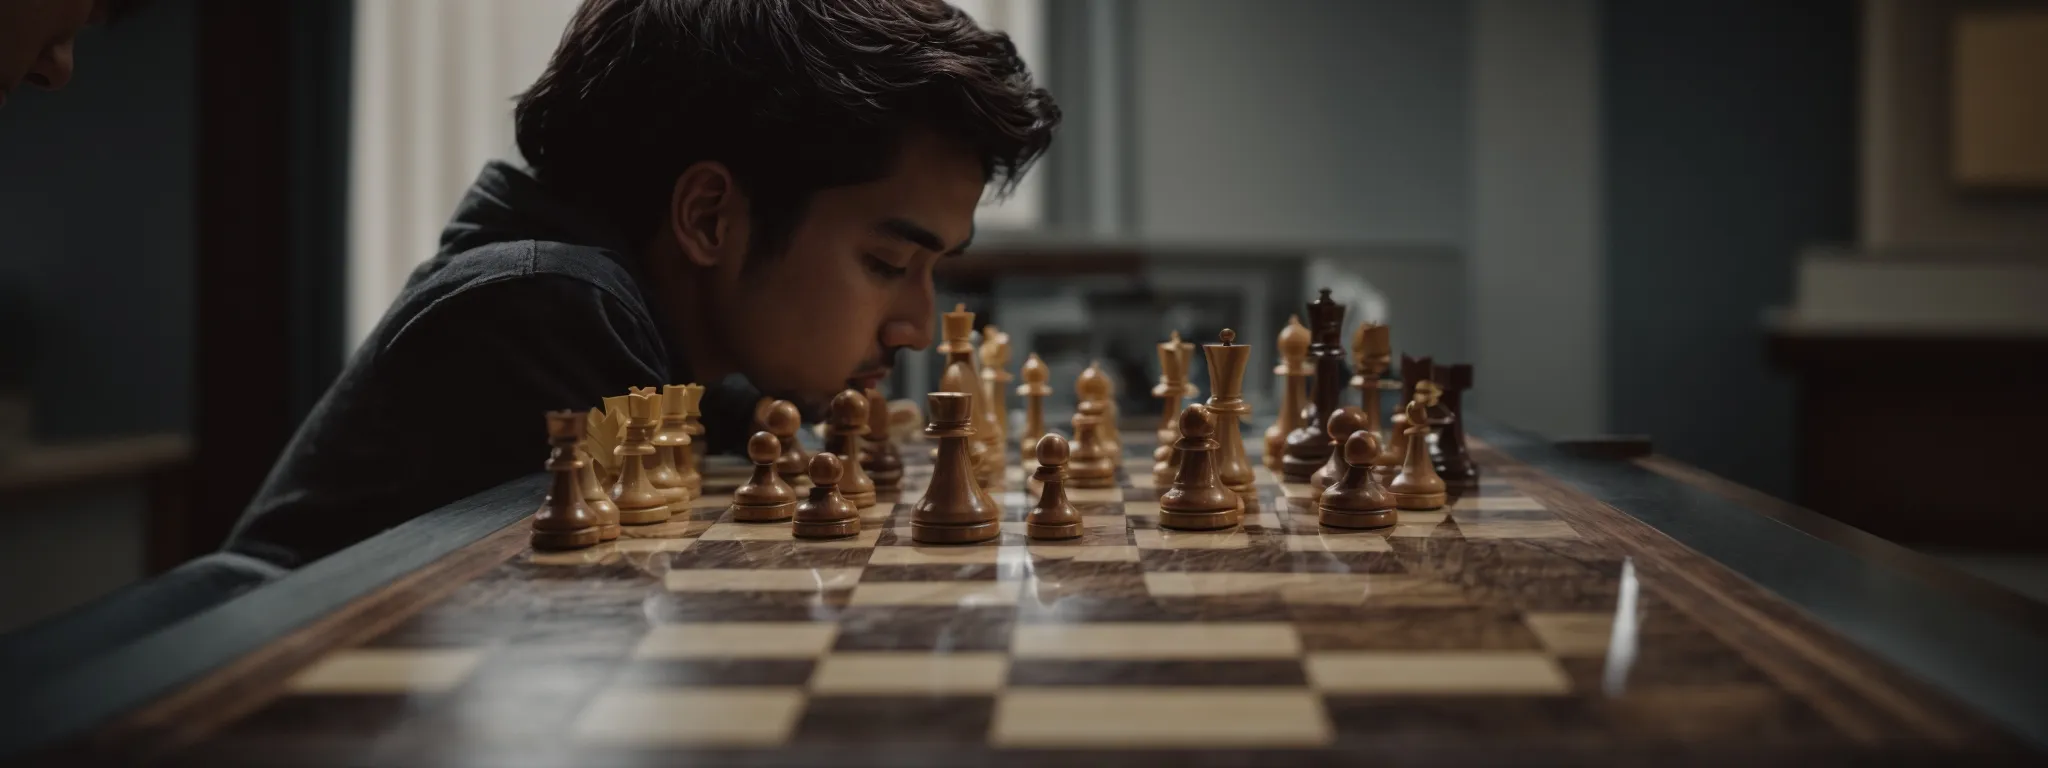 a chessboard with one player poised in deep contemplation, symbolizing strategic rivalry.